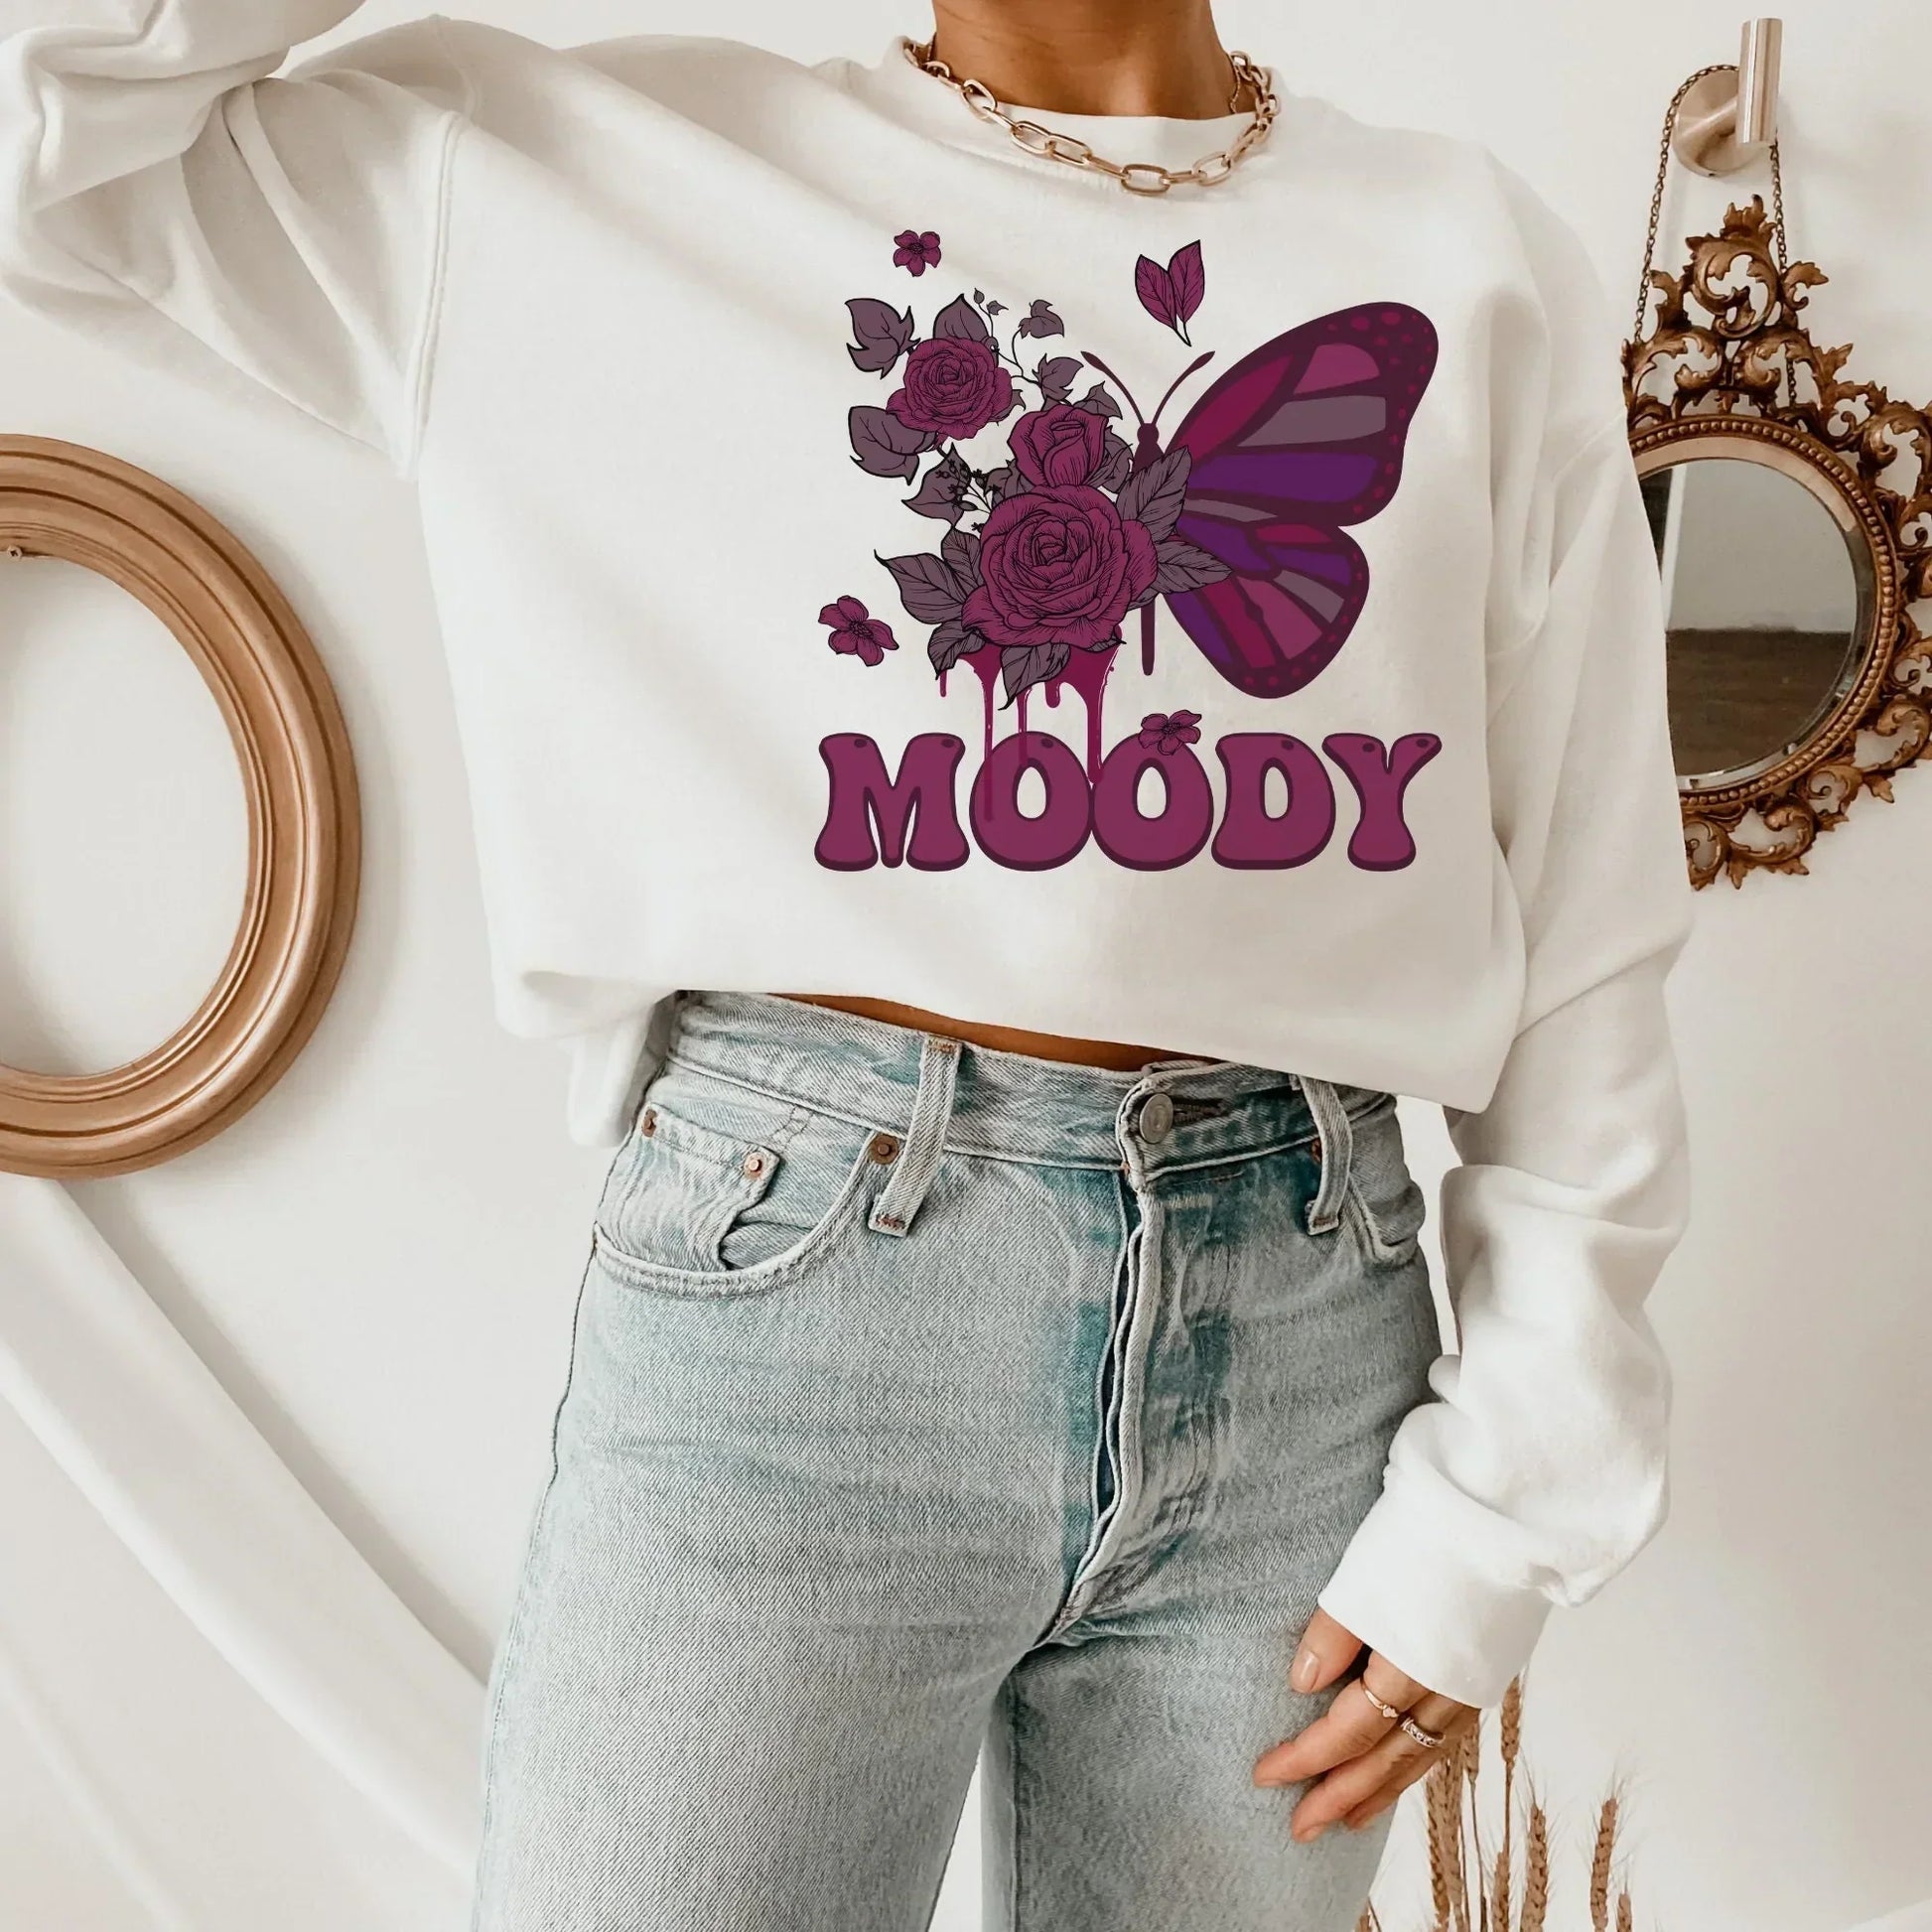 Gothic Shirt, Goth Clothing, Moody Tshirt, Spooky Halloween Sweatshirt, Witchy Vibes, Butterfly Shirt, Moon Shirt, Magical Witch Shirt, EMO HMDesignStudioUS